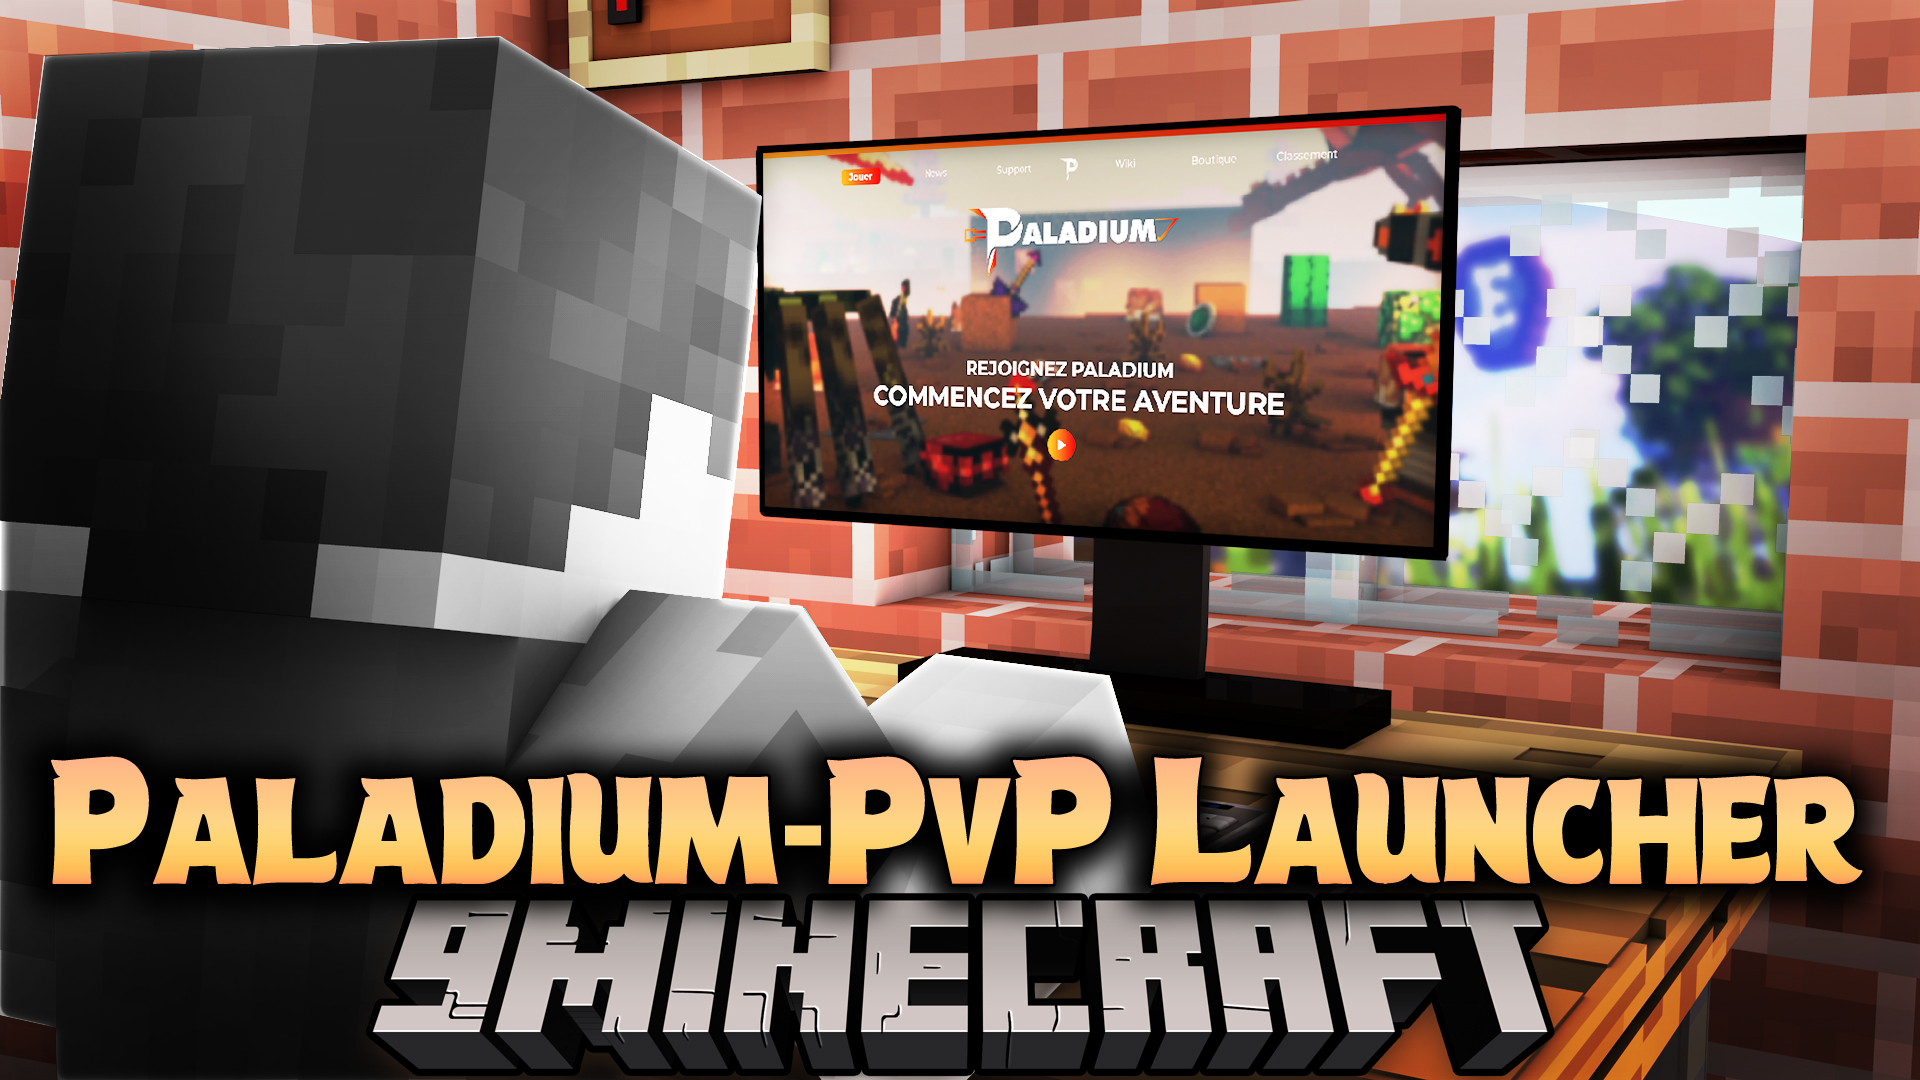 Paladium-PvP Launcher - Get Started Your Adventure 1